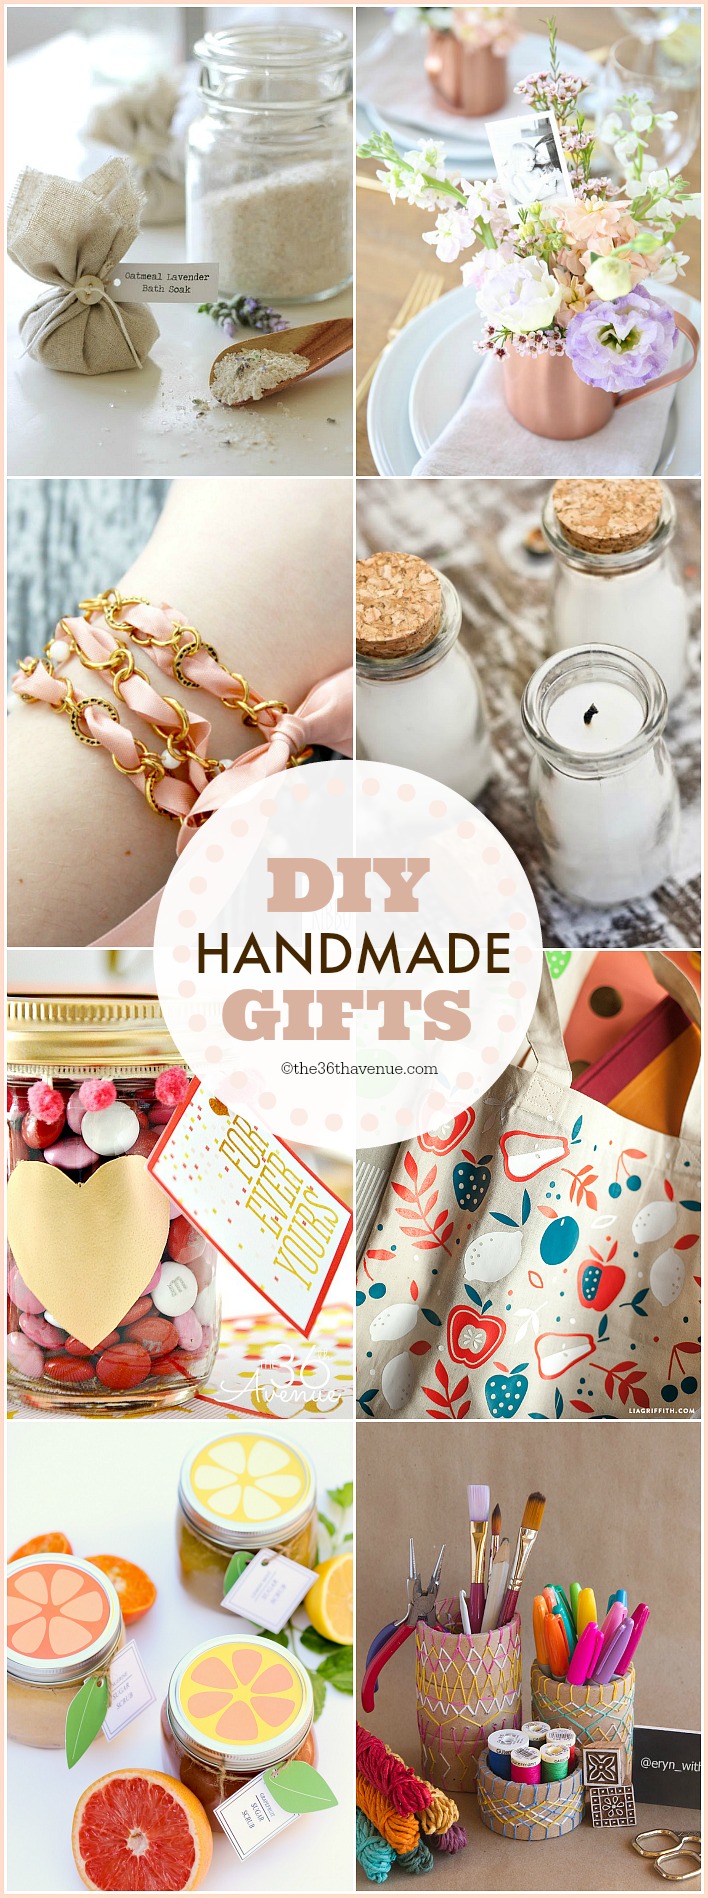 13 Of The Best Simple Handmade Gifts To Make This Year | Easy handmade gifts,  Creative diy gifts, Handmade gifts diy